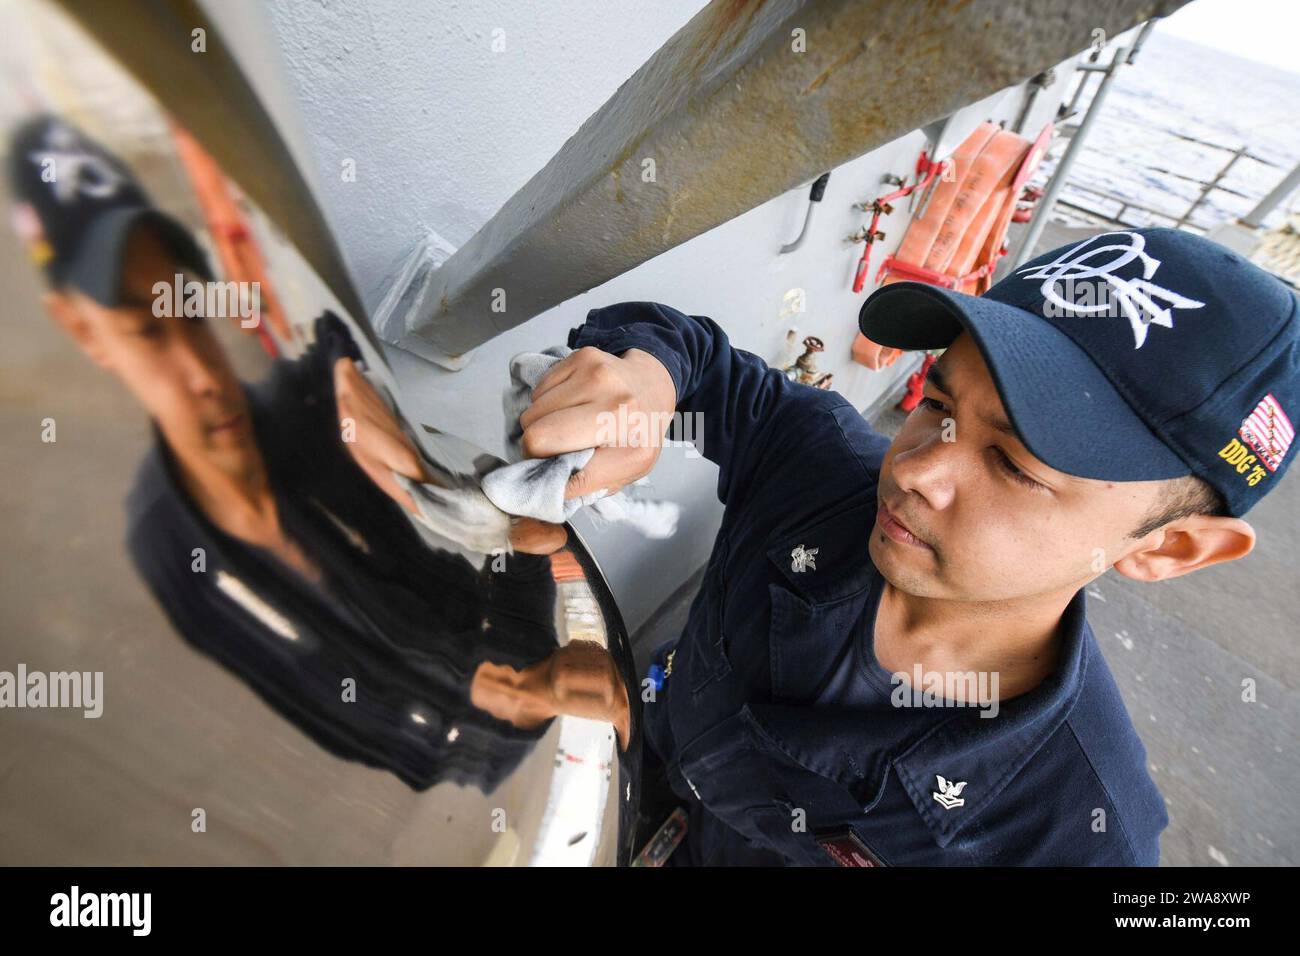 US military forces. 171113FP878-001 MEDITERRANEAN SEA (Nov. 13, 2017) Culinary Specialist 2nd Class Julian Fuenzalida, from Virginia Beach, Virginia, polishes the ship’s bell aboard the Arleigh Burke-class guided-missile destroyer USS Donald Cook (DDG 75) during exercise Dogu Akdeniz 2017, Nov. 13. Dogu Akdeniz is a Turkish-led, multinational maritime exercise designed to improve combined combat capabilities, increase operational capacity and strengthen relationships among NATO allies. (U.S. Navy photo by Mass Communication Specialist 1st Class Theron J. Godbold /Released) Stock Photo